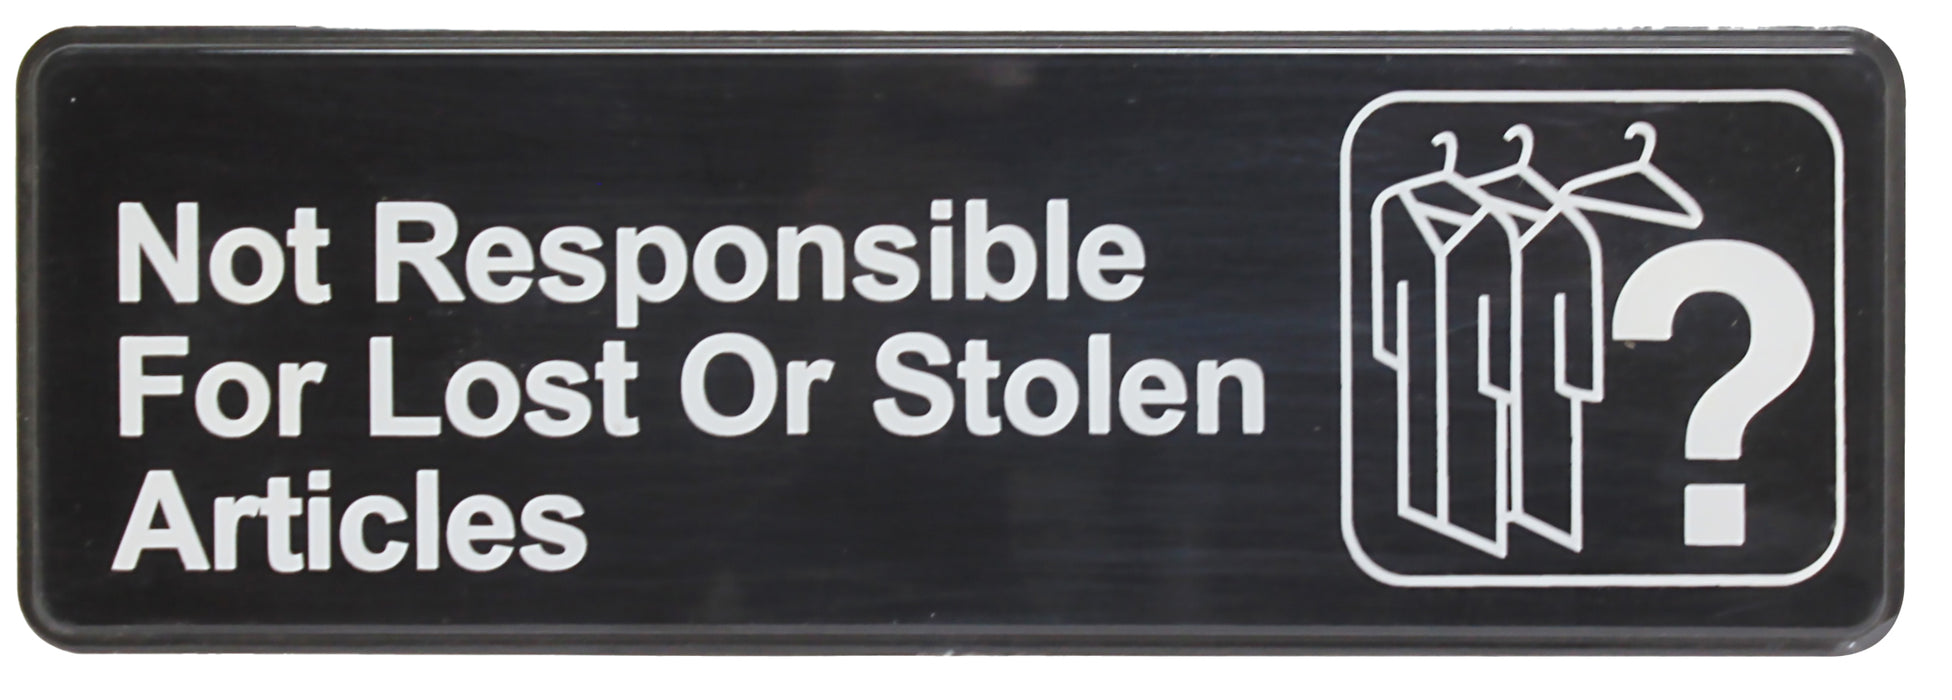 Sign 9" x 3" x 1/8", Not Responsible for Lost or Stolen Articles QTY-12-cityfoodequipment.com